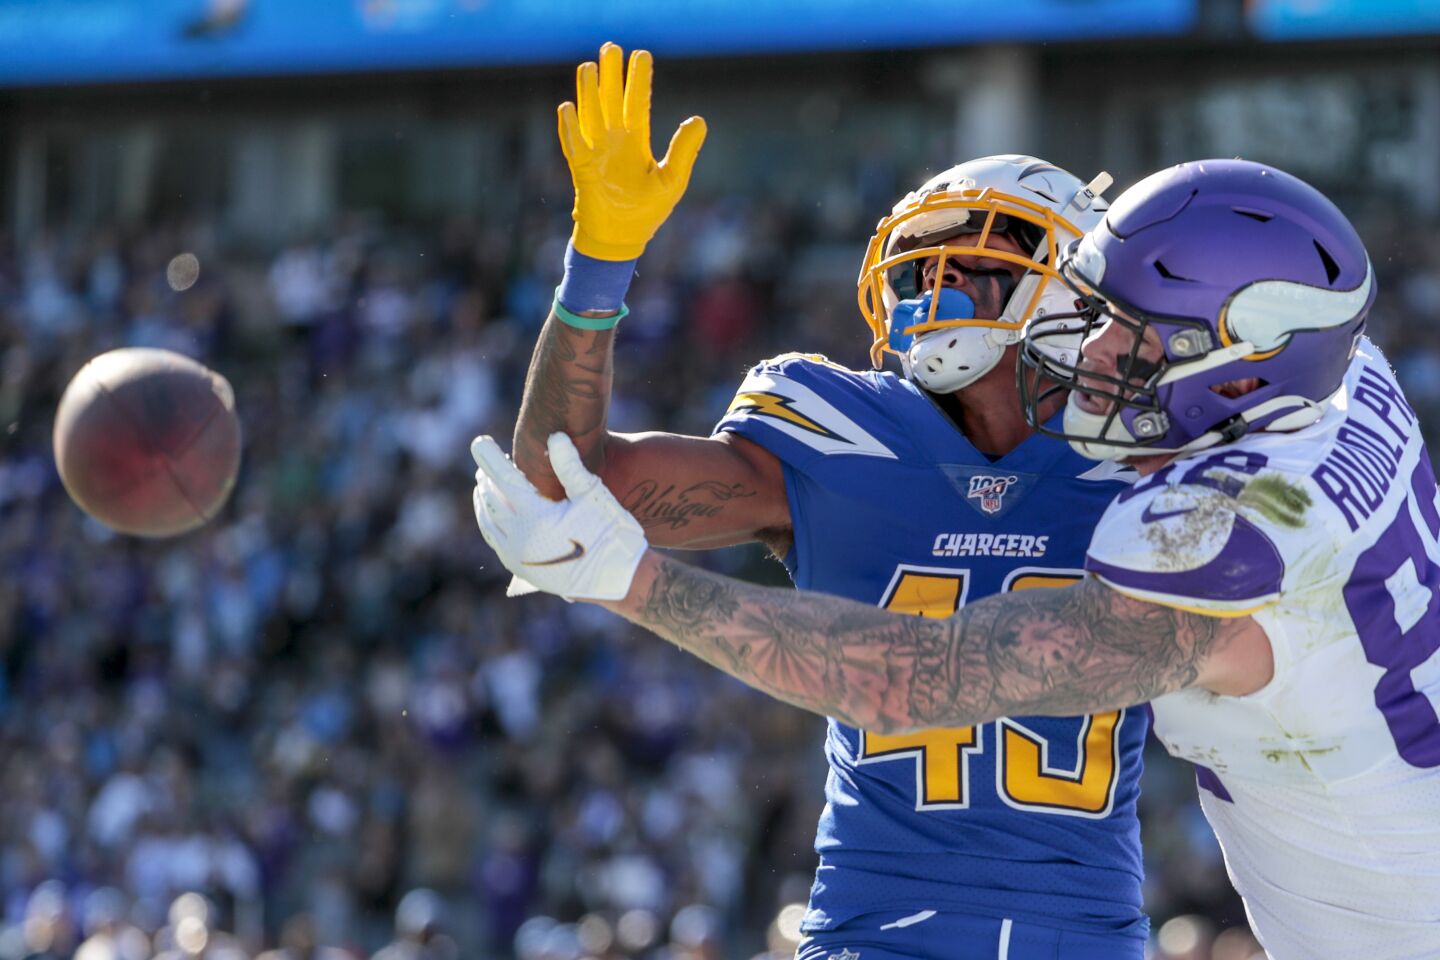 Chargers cornerback Michael Davis, left, draws a pass interference penalty while guarding Minnesota Vikings tight end Kyle Rudolph.